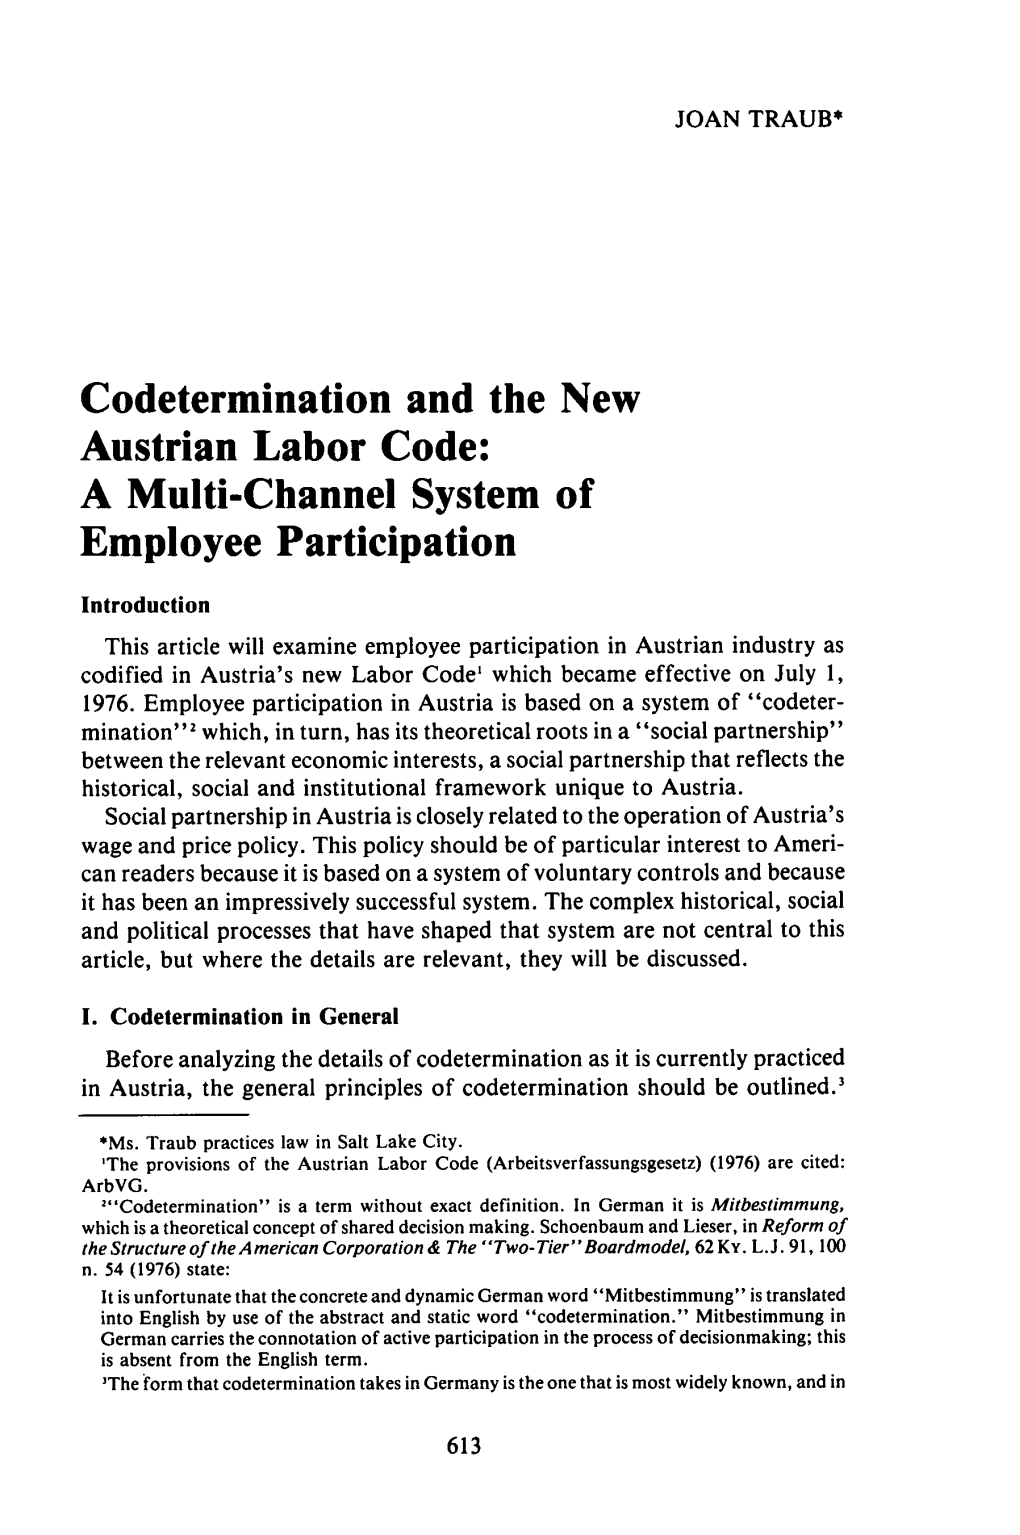 Codetermination and the New Austrian Labor Code: a Multi-Channel System of Employee Participation